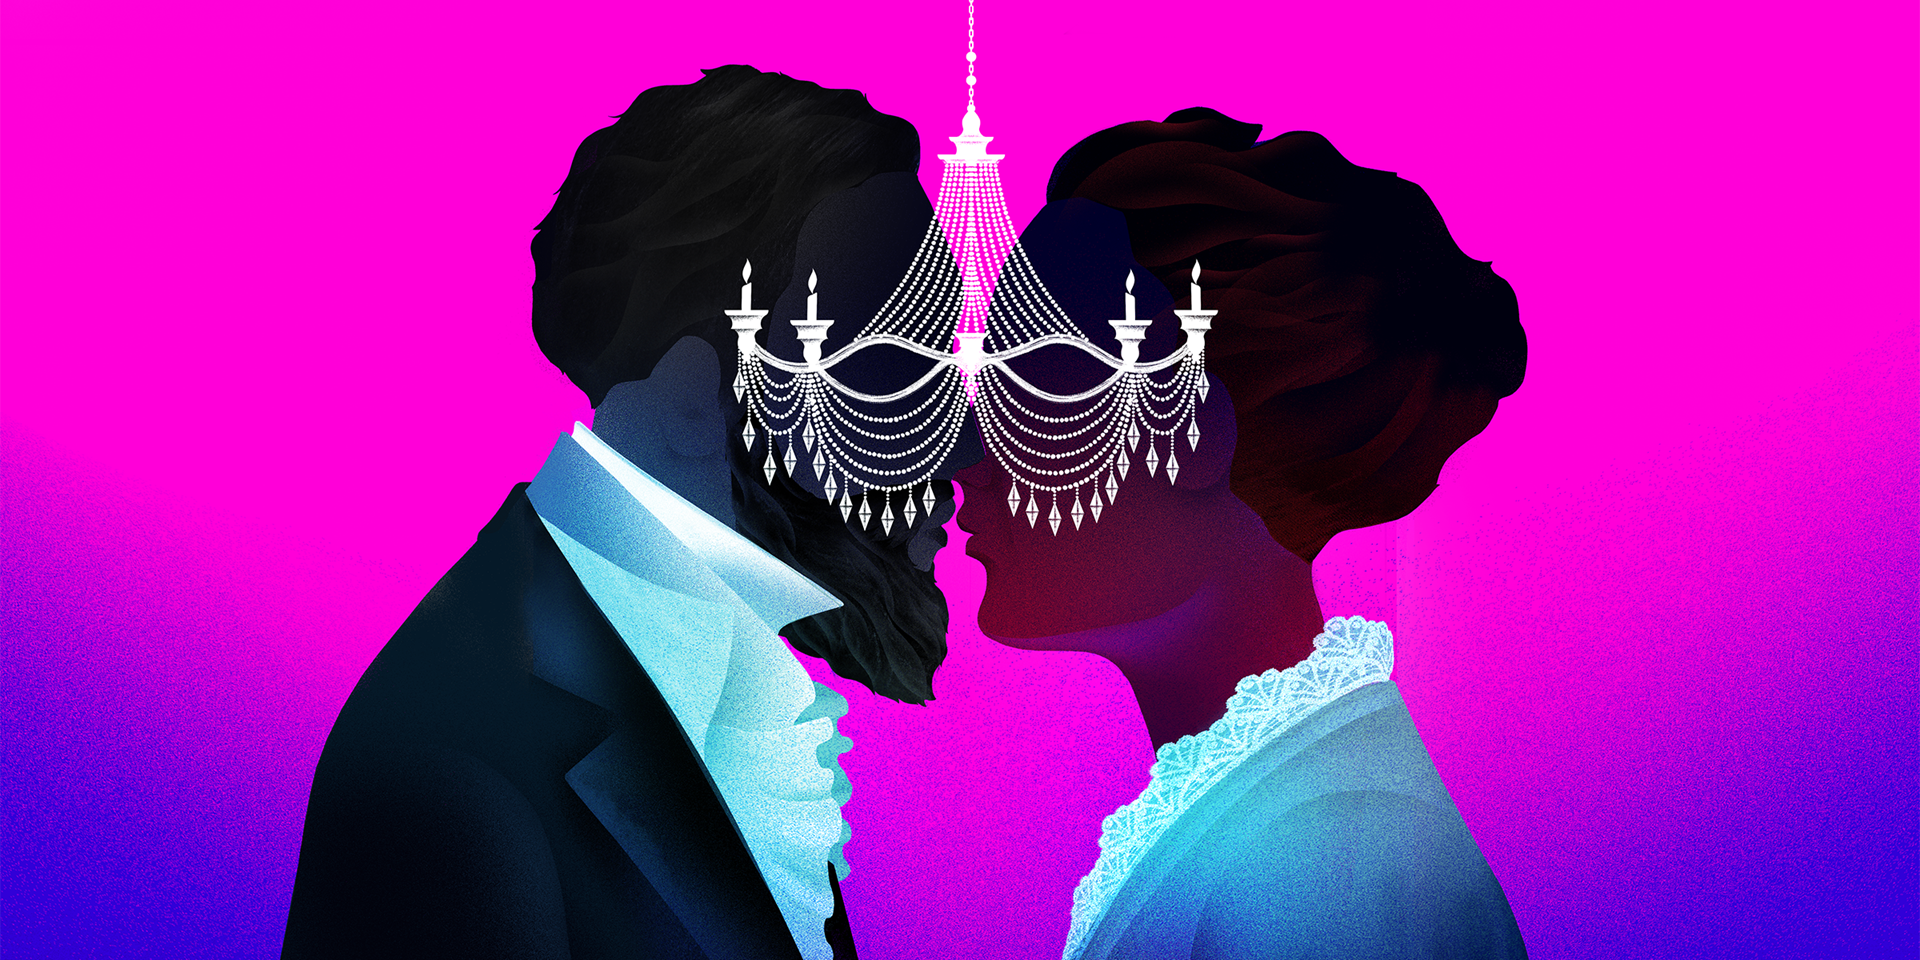 Un Ballo in Maschera graphic depicting a male and female silhouette face to face with a chandelier between them.